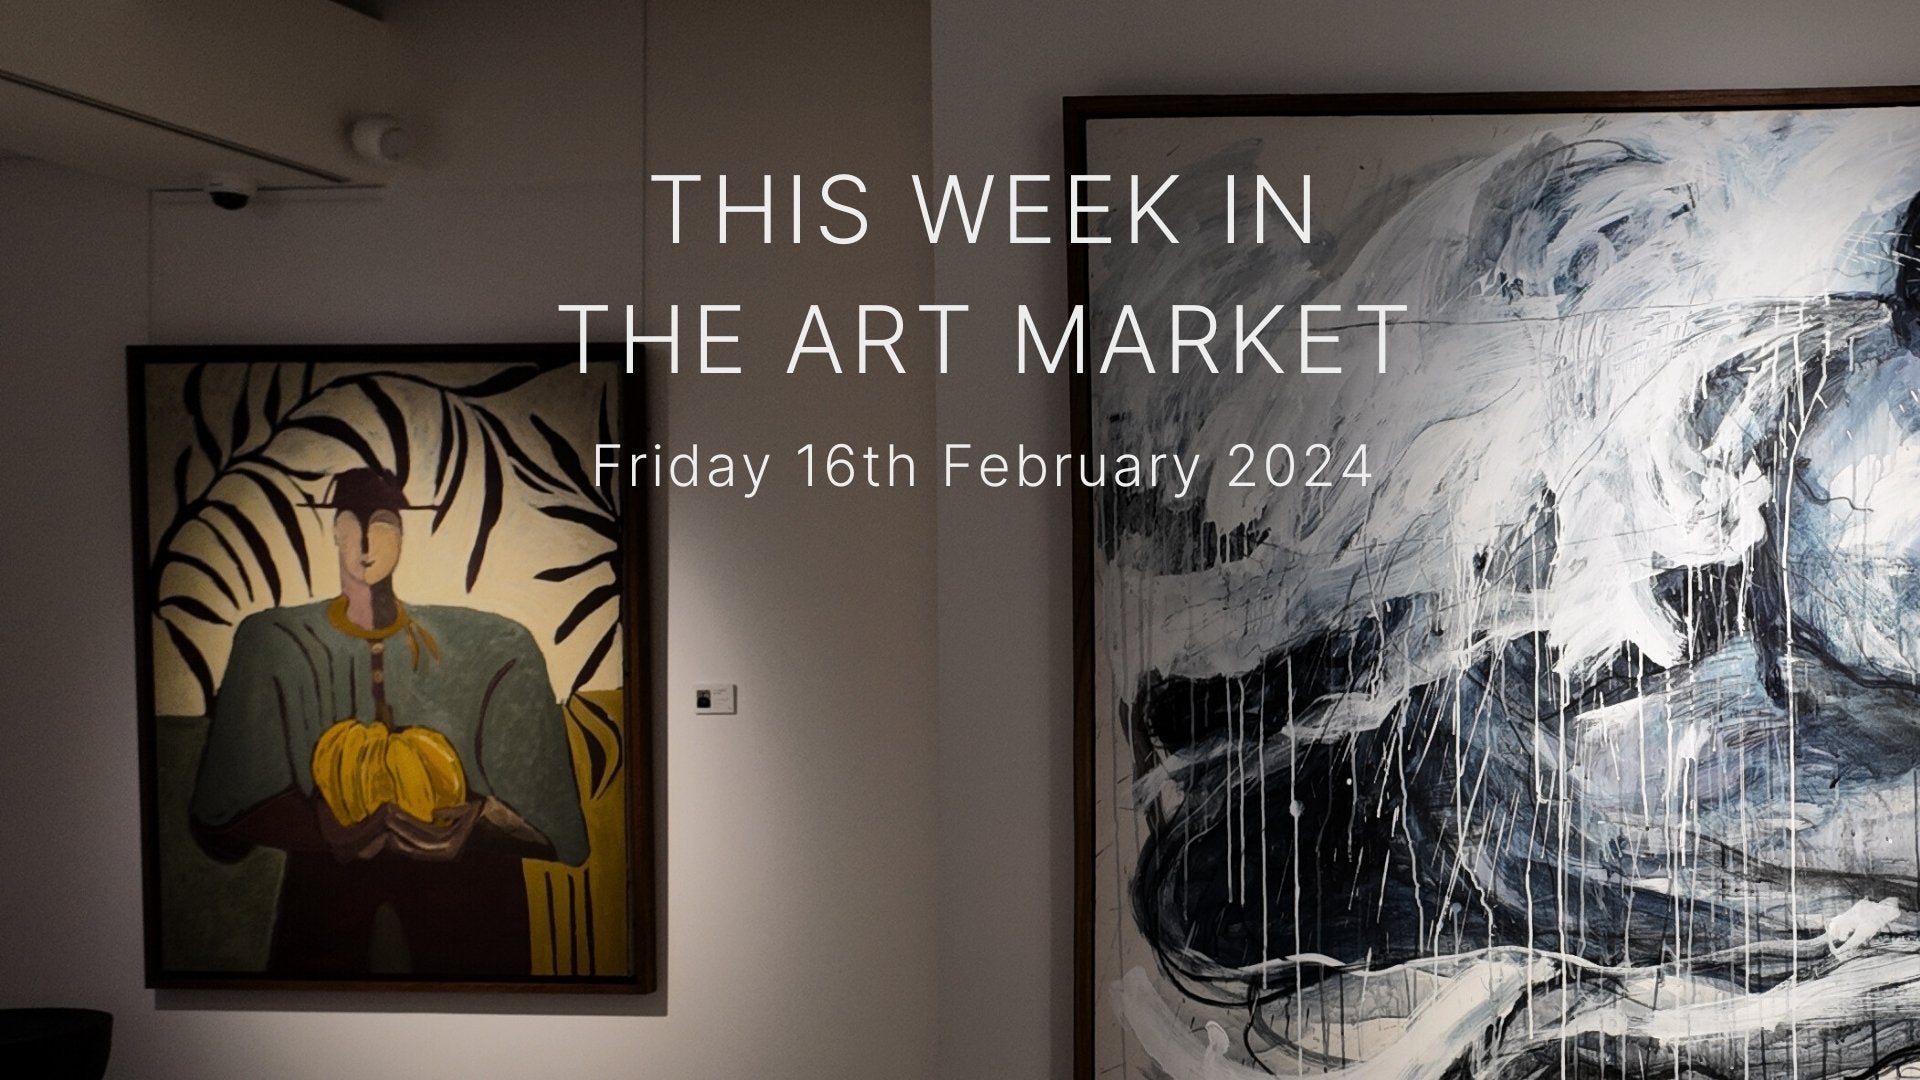 This Week in the Art Market – Friday 16th February 2024